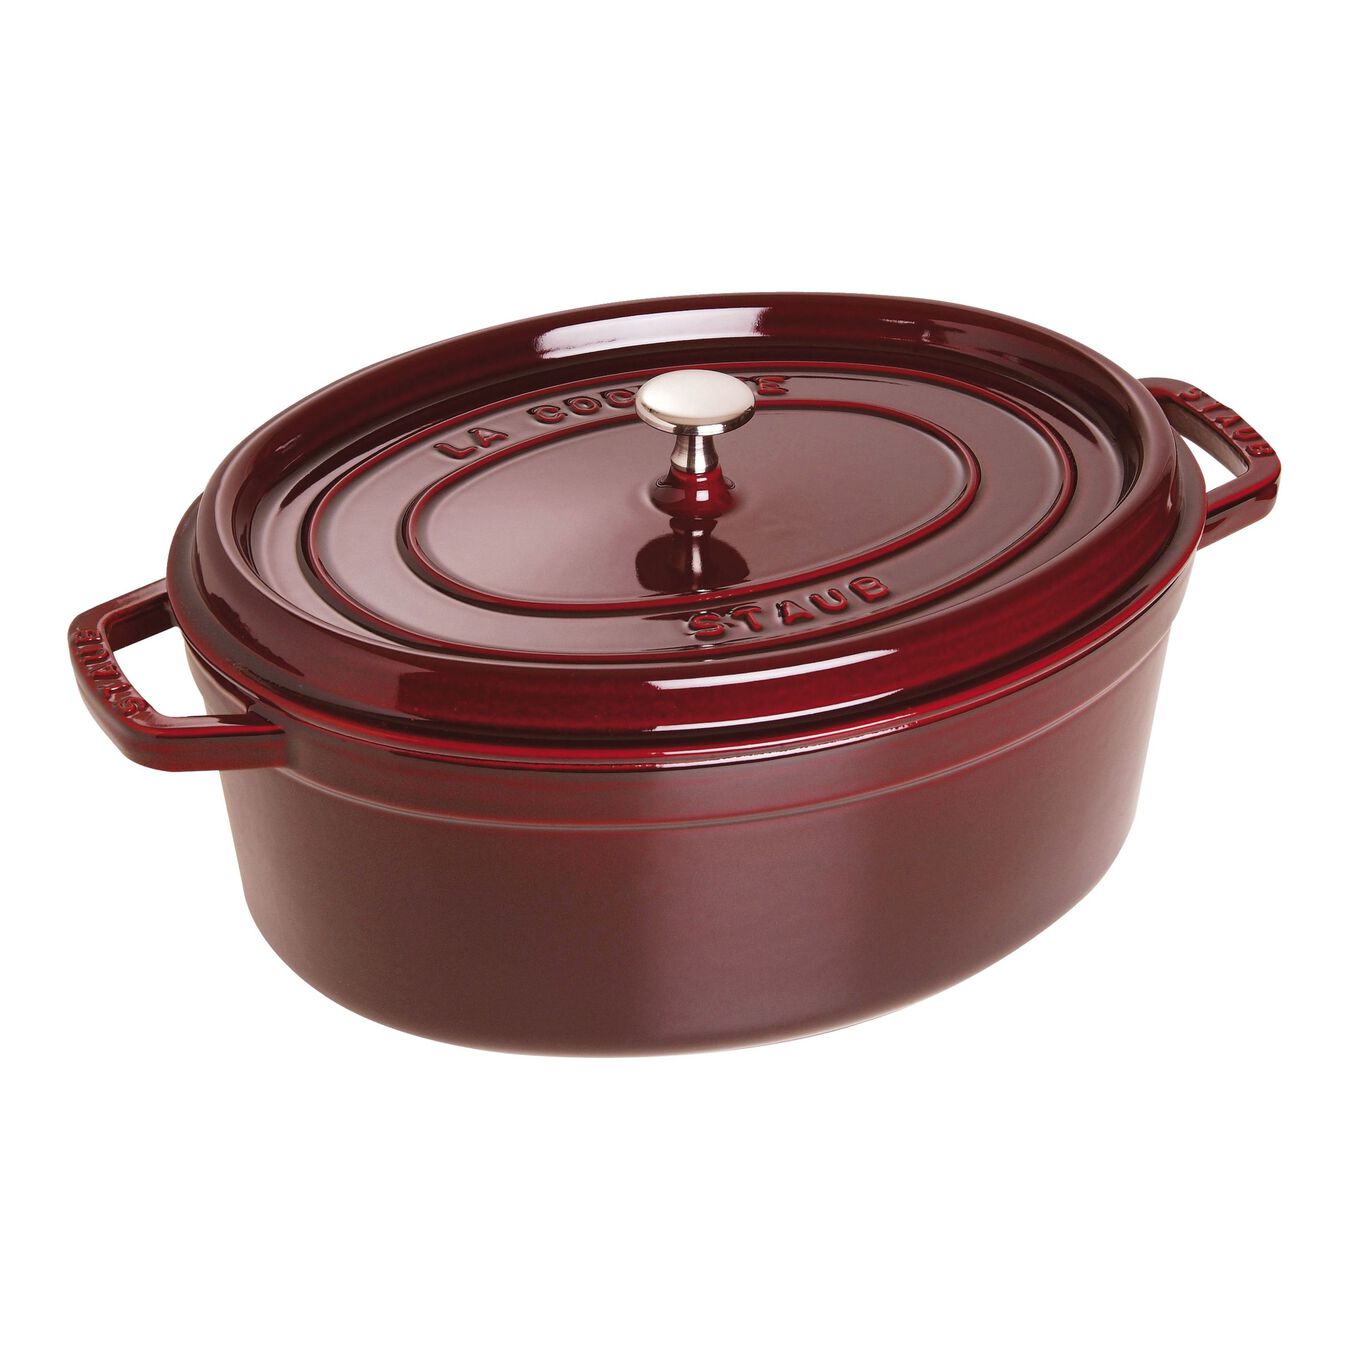 Cocotte 31 cm, oval, Grenadine-Rot, Gusseisen,,large 1